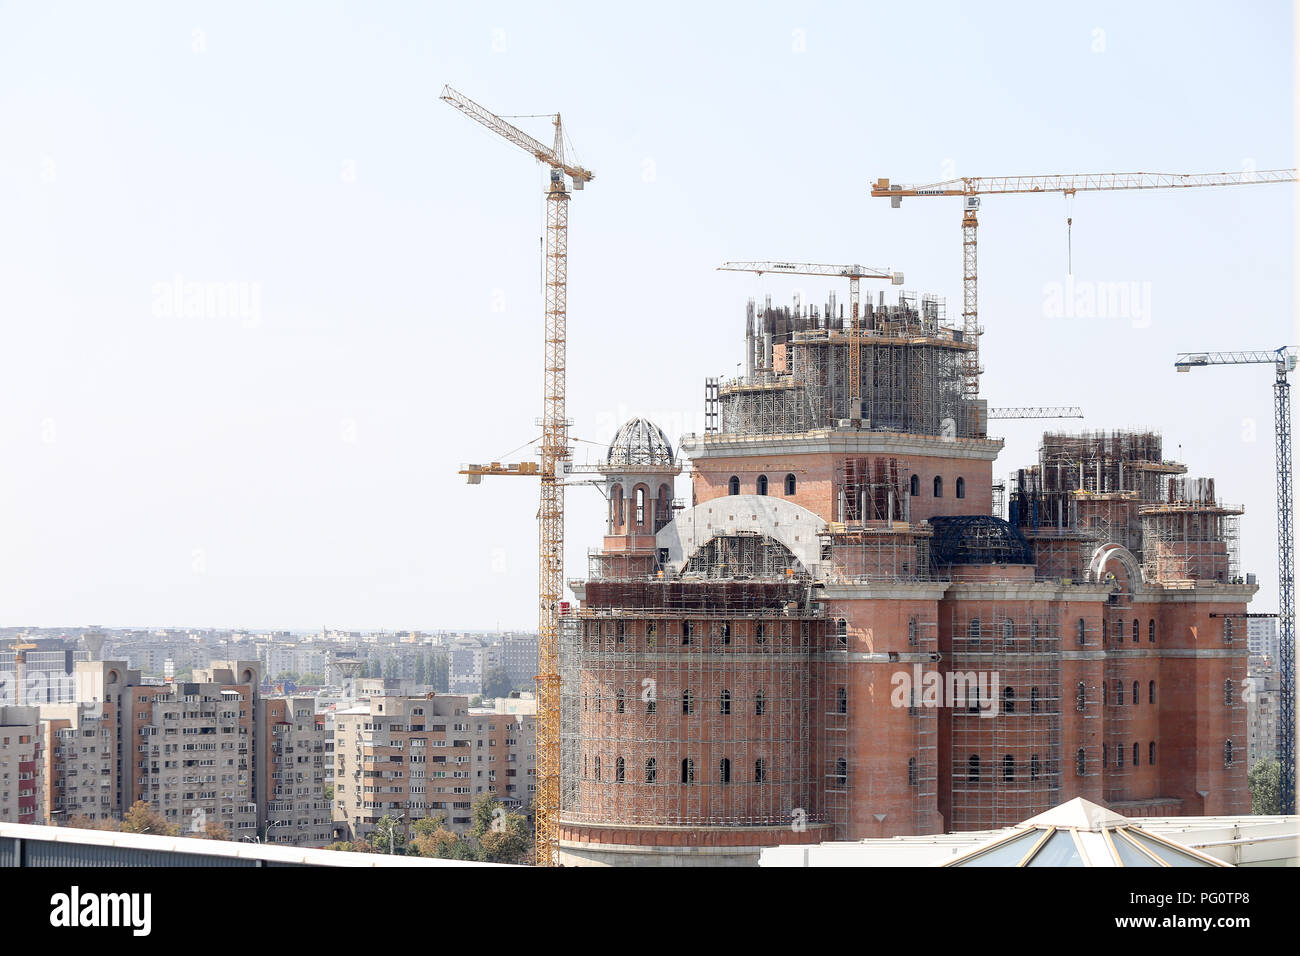 Construction site of “Catedrala Mantuirii Neamului”, an christian orthodox cathedral in Bucharest, Romania Stock Photo